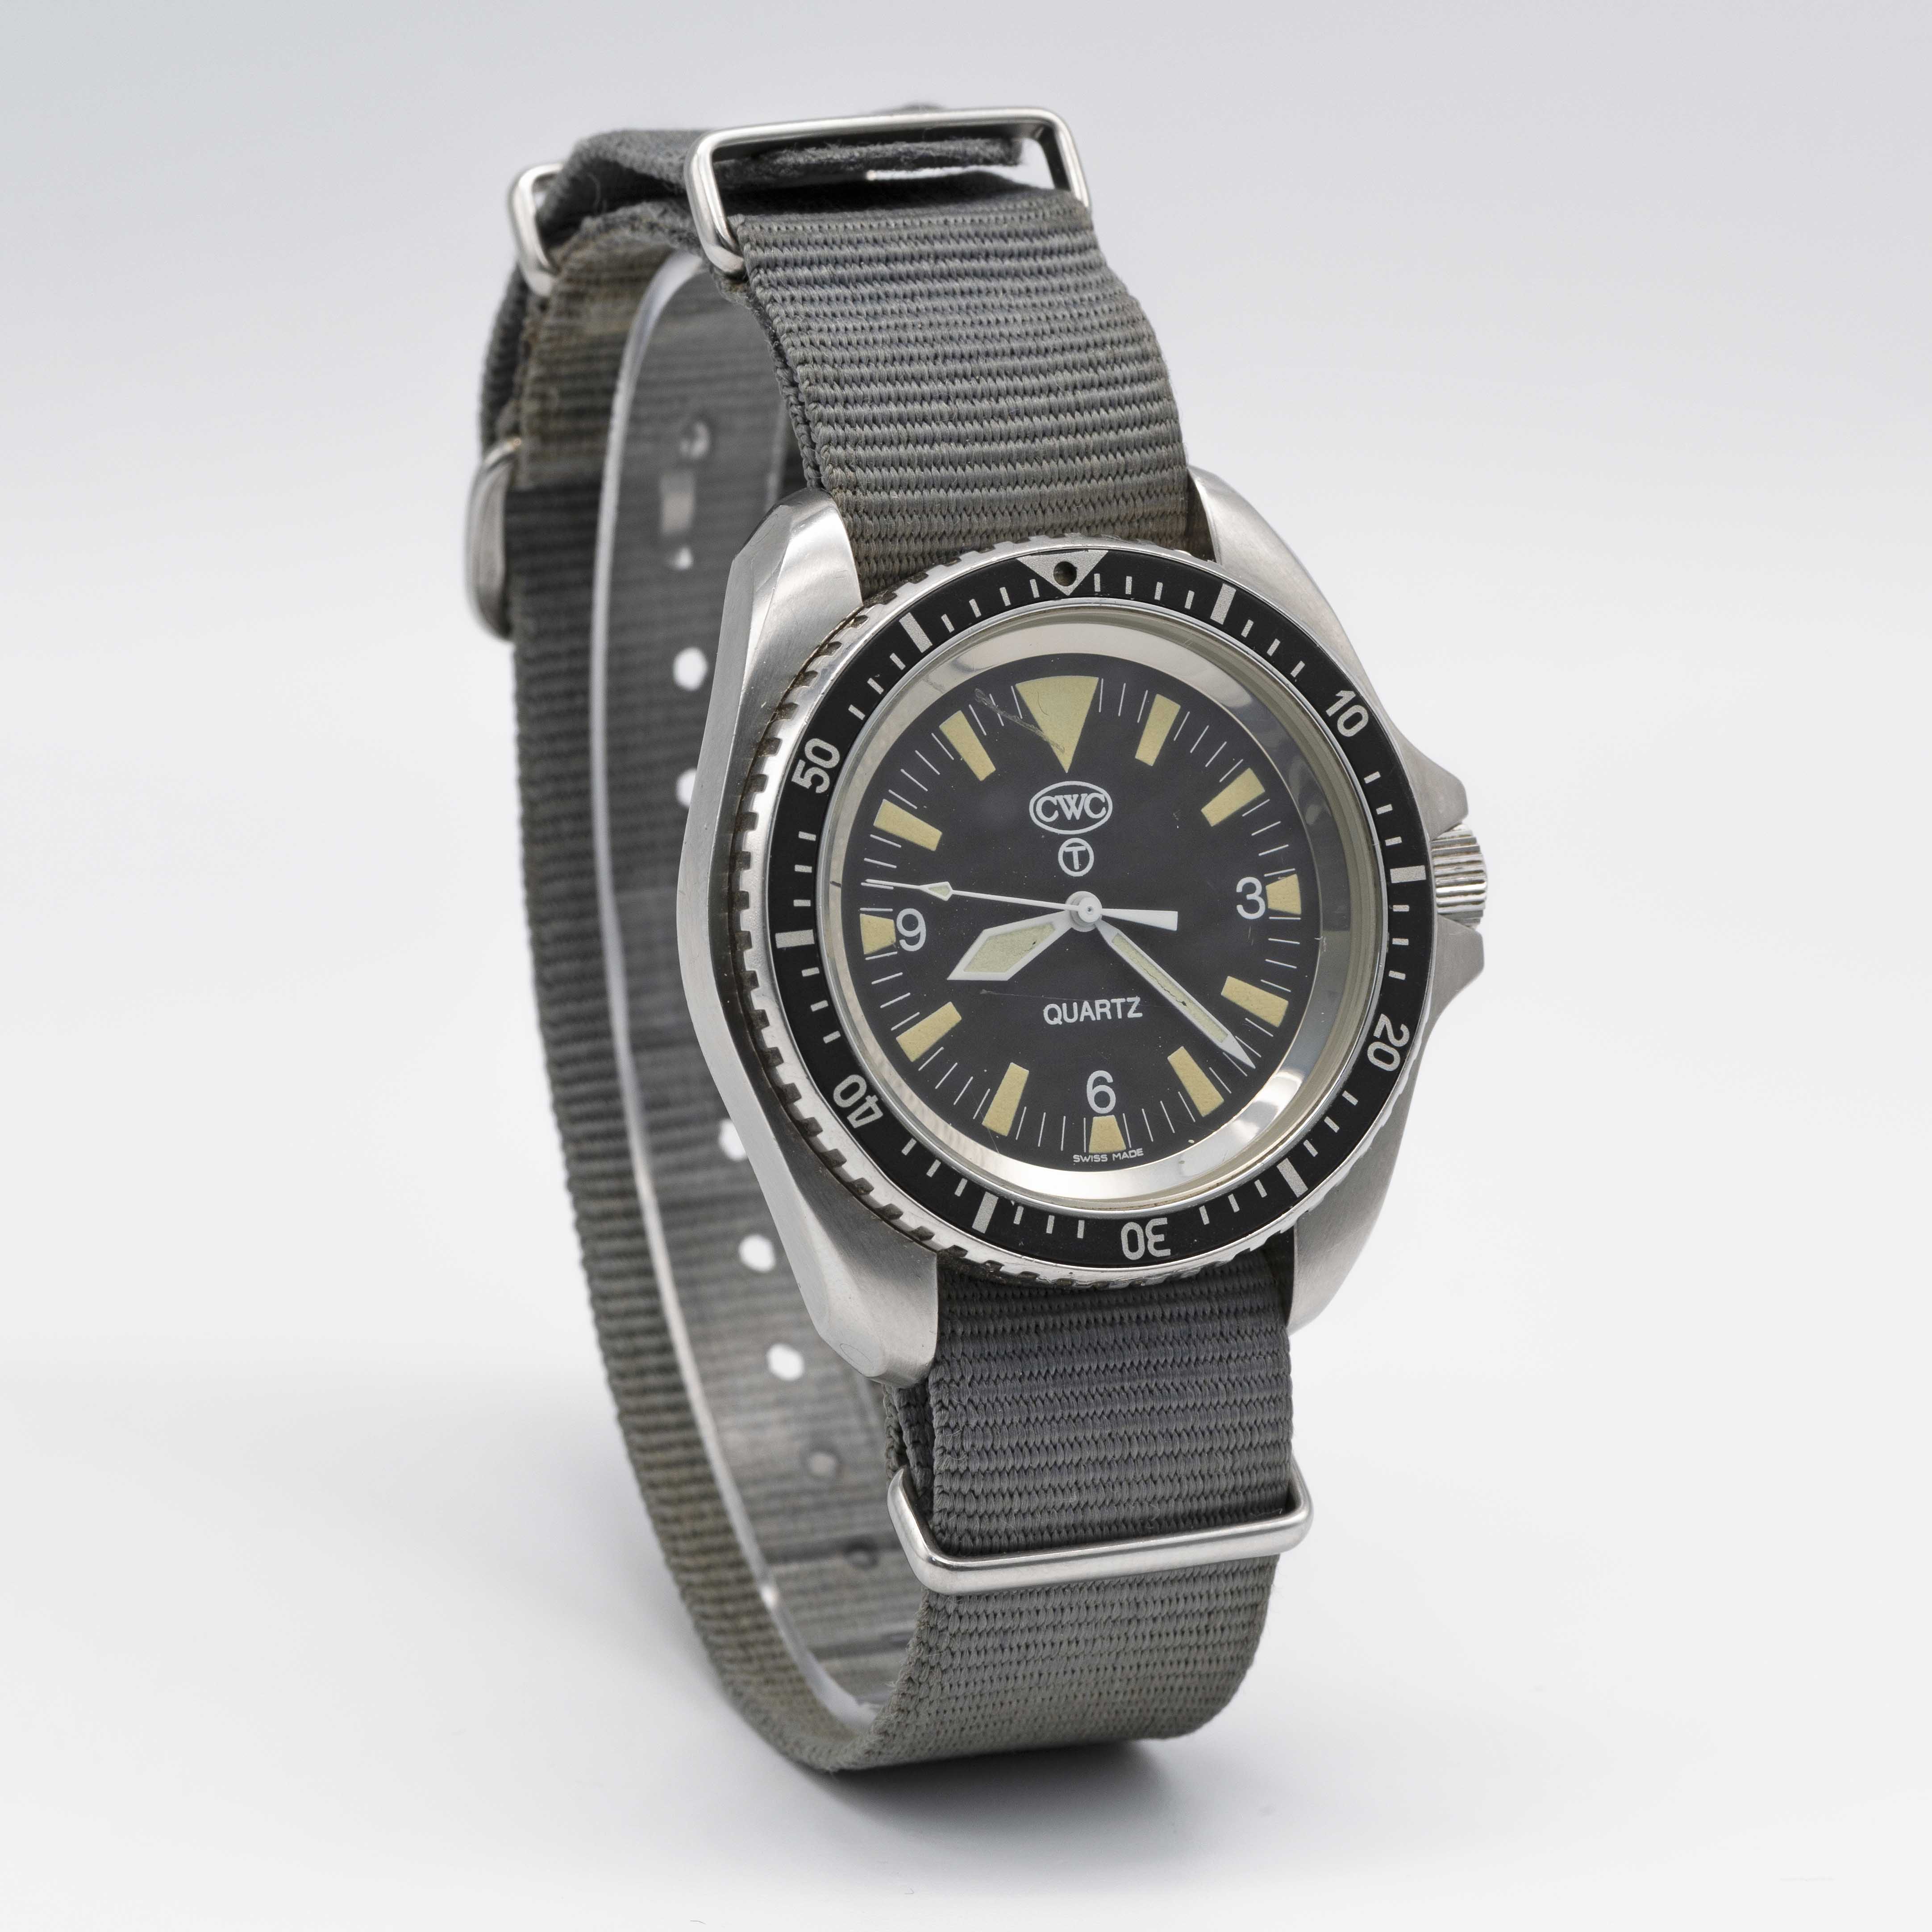 A GENTLEMAN'S STAINLESS STEEL BRITISH MILITARY ISSUED CWC QUARTZ ROYAL NAVY DIVERS WRIST WATCH DATED - Image 4 of 8